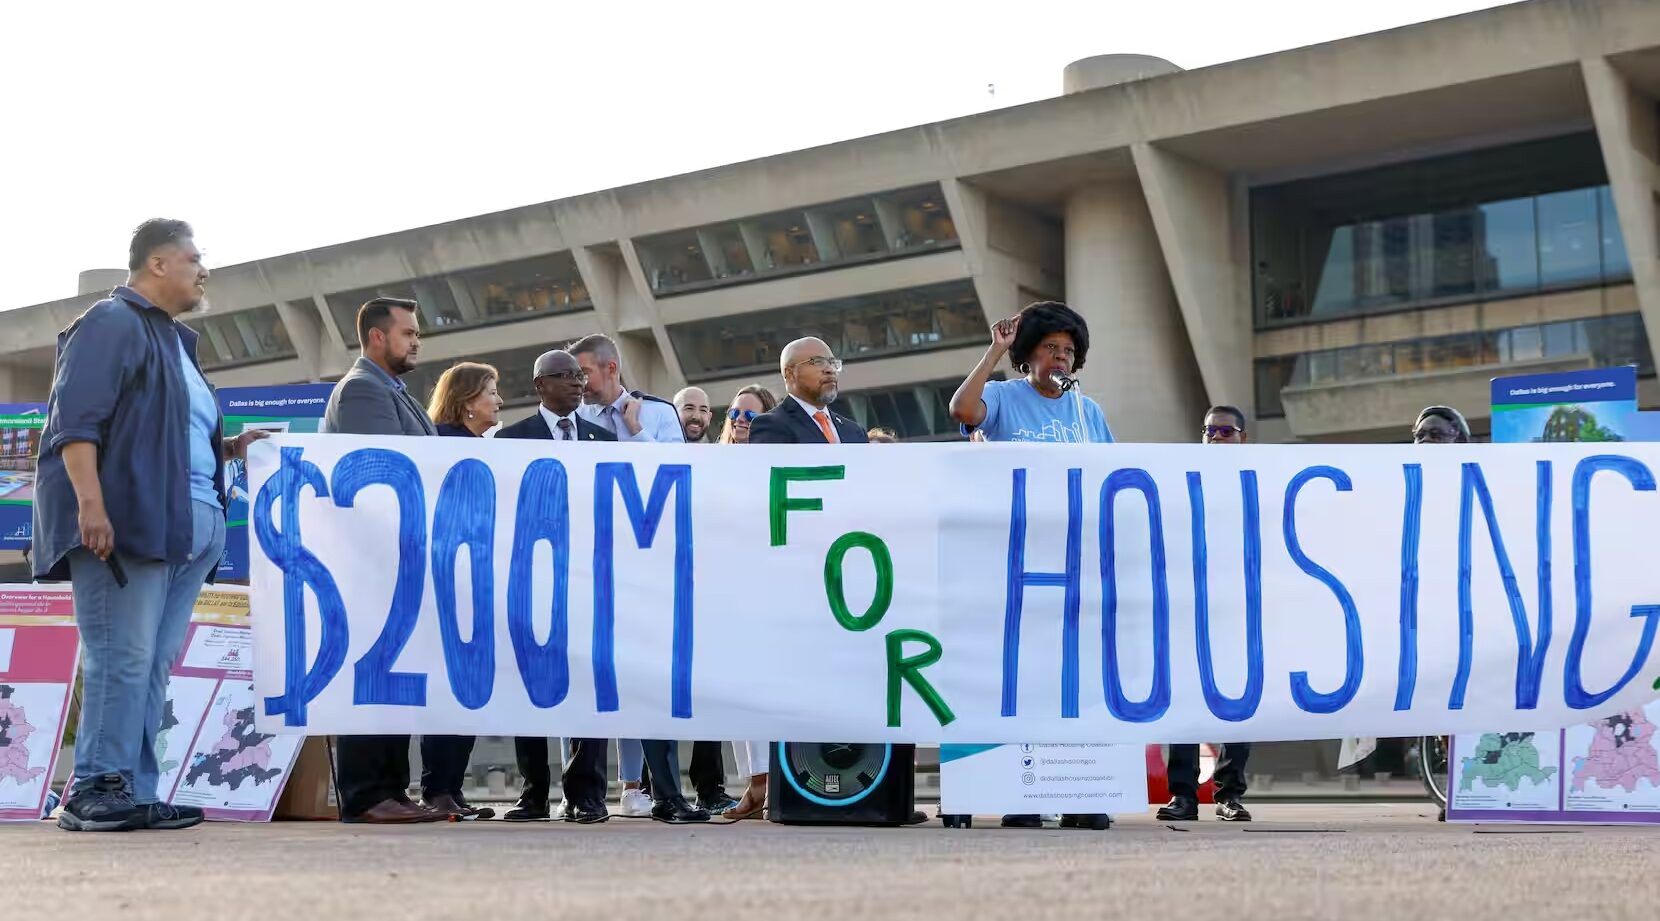 Former Dallas City Council member Diane Ragsdale speaks during an affordable housing rally sponsored by Dallas Housing Coalition on Wednesday, Sept. 20, 2023 at Dallas City Hall. (Shafkat Anowar / Staff Photographer)